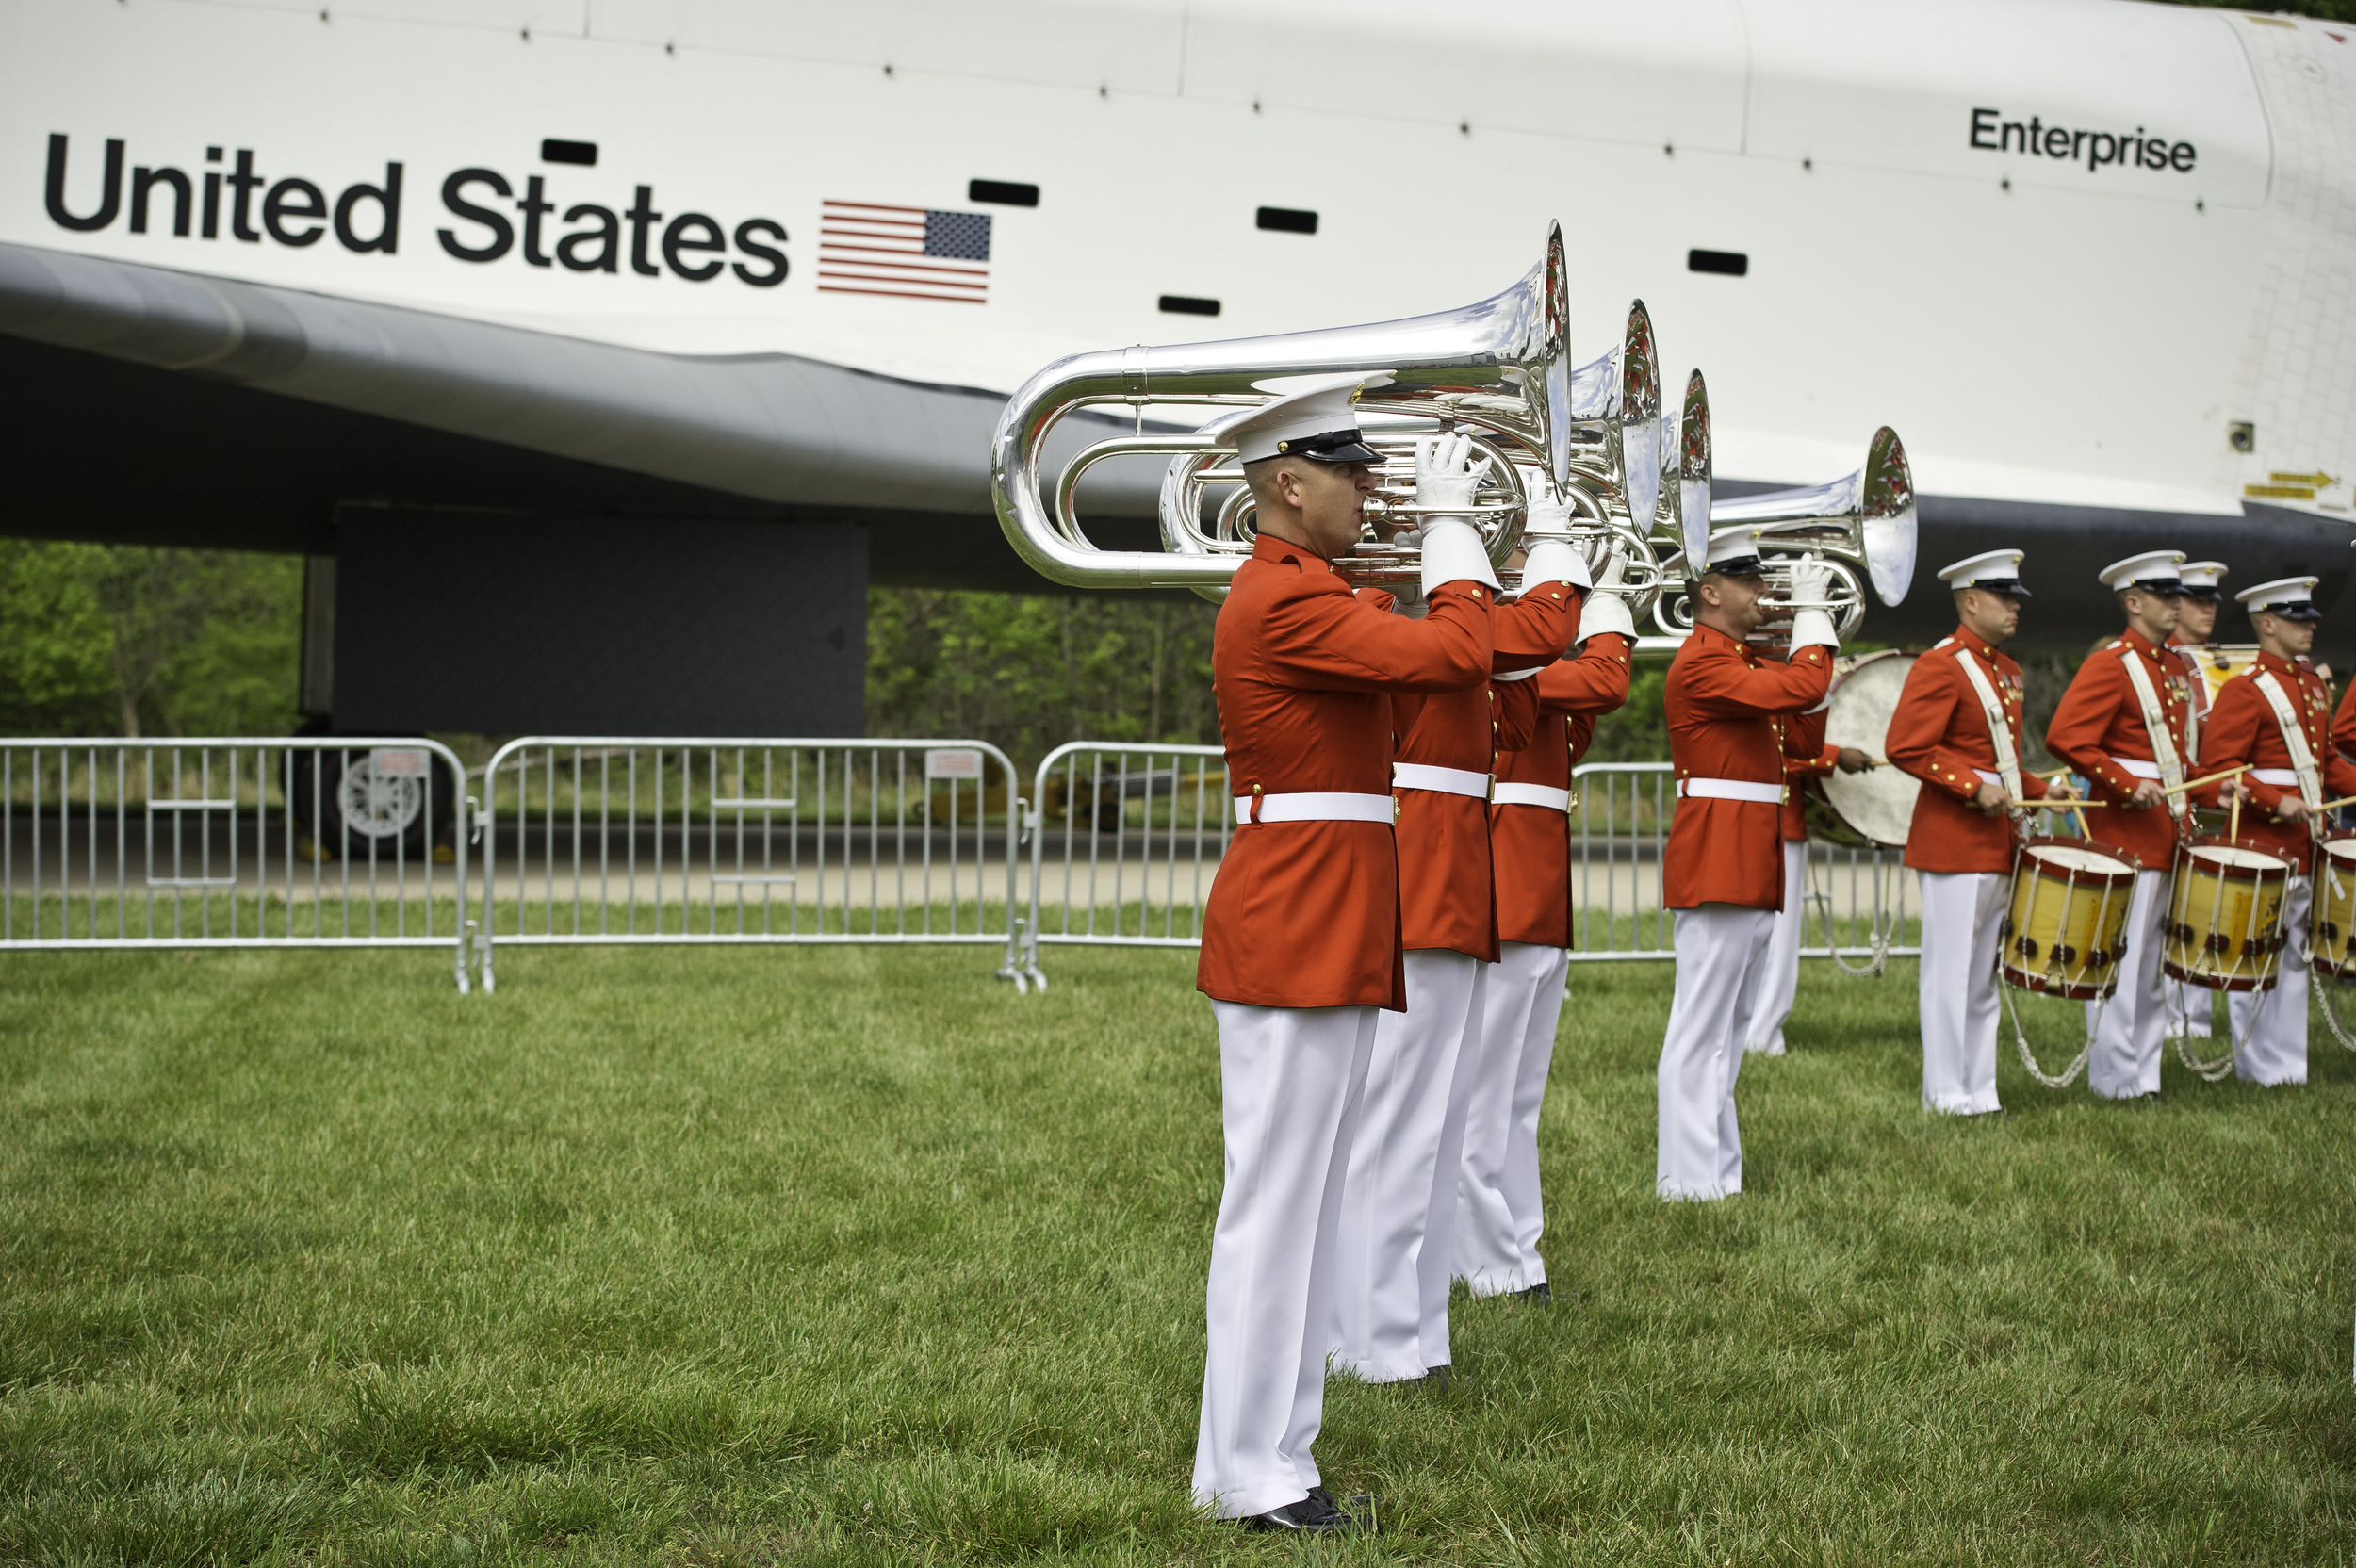  Space shuttle Enterprise is seen with the United States Marine Corp Drum and Bugle Corps and Color Guard at the Steven F. Udvar-Hazy Center Thursday, April 19, 2012 in Chantilly, Va. Enterprise was the first space shuttle orbiter, built for NASA to 